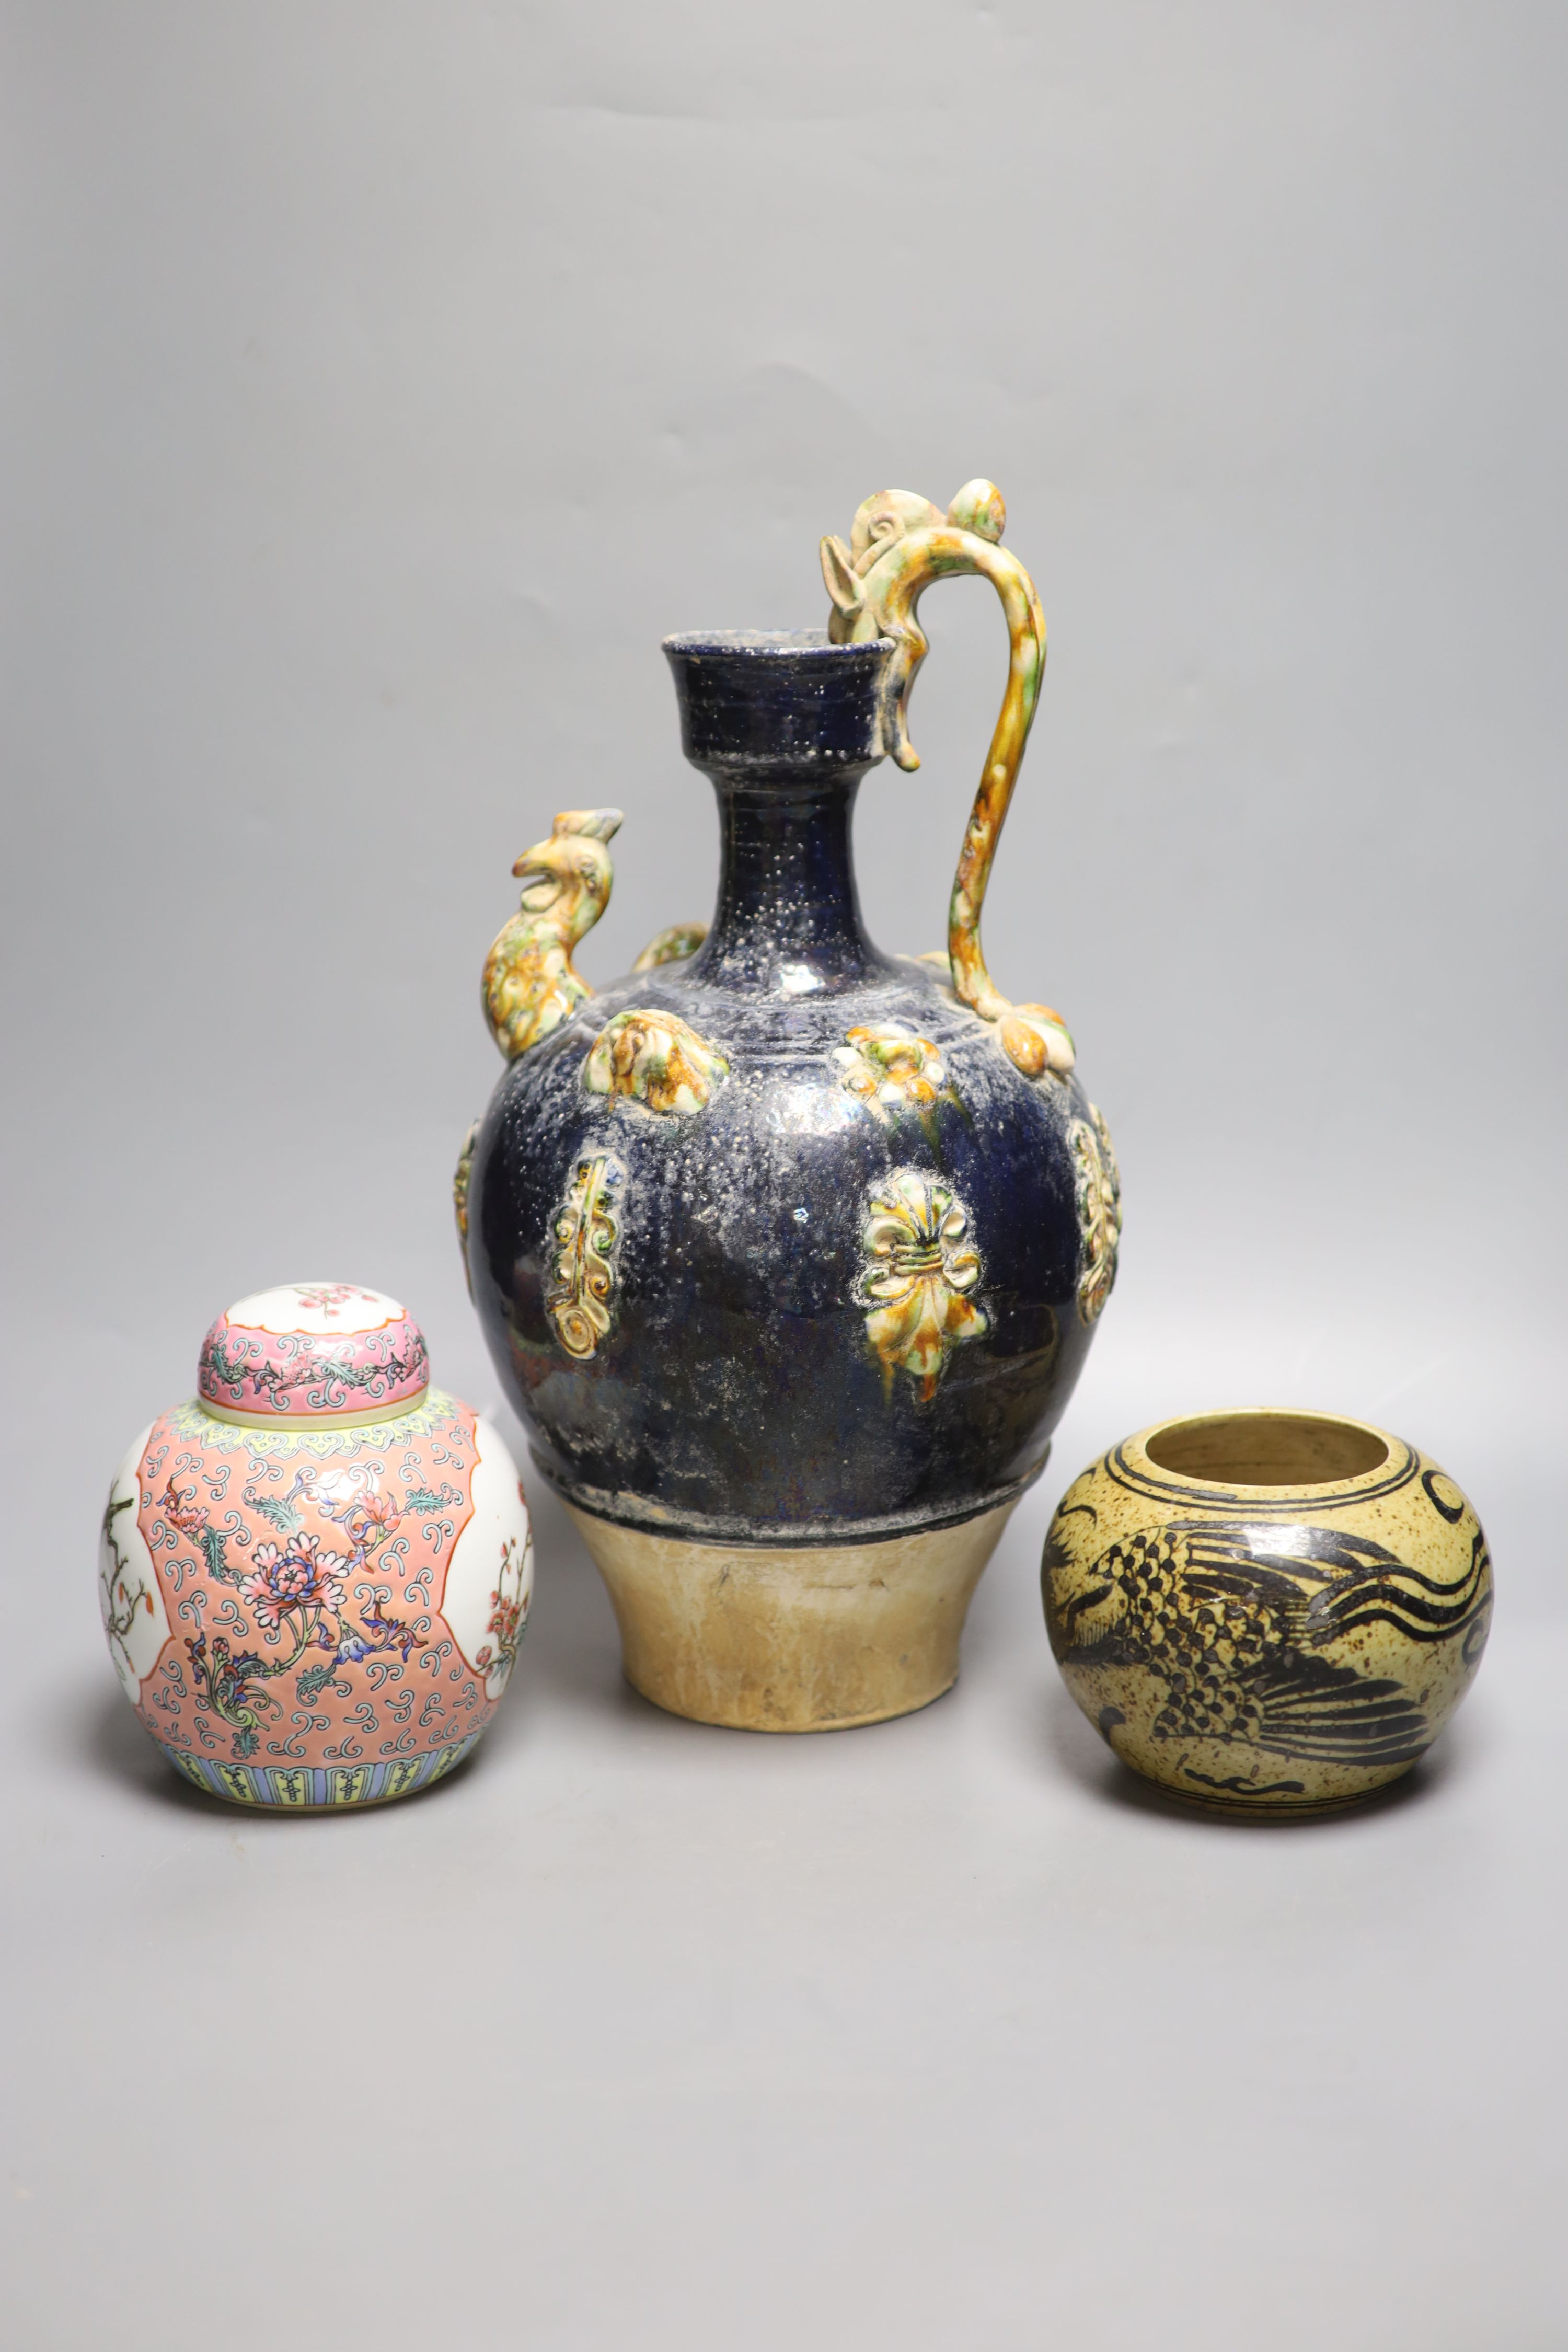 A Chinese pottery ewer, ginger jar and a bowl